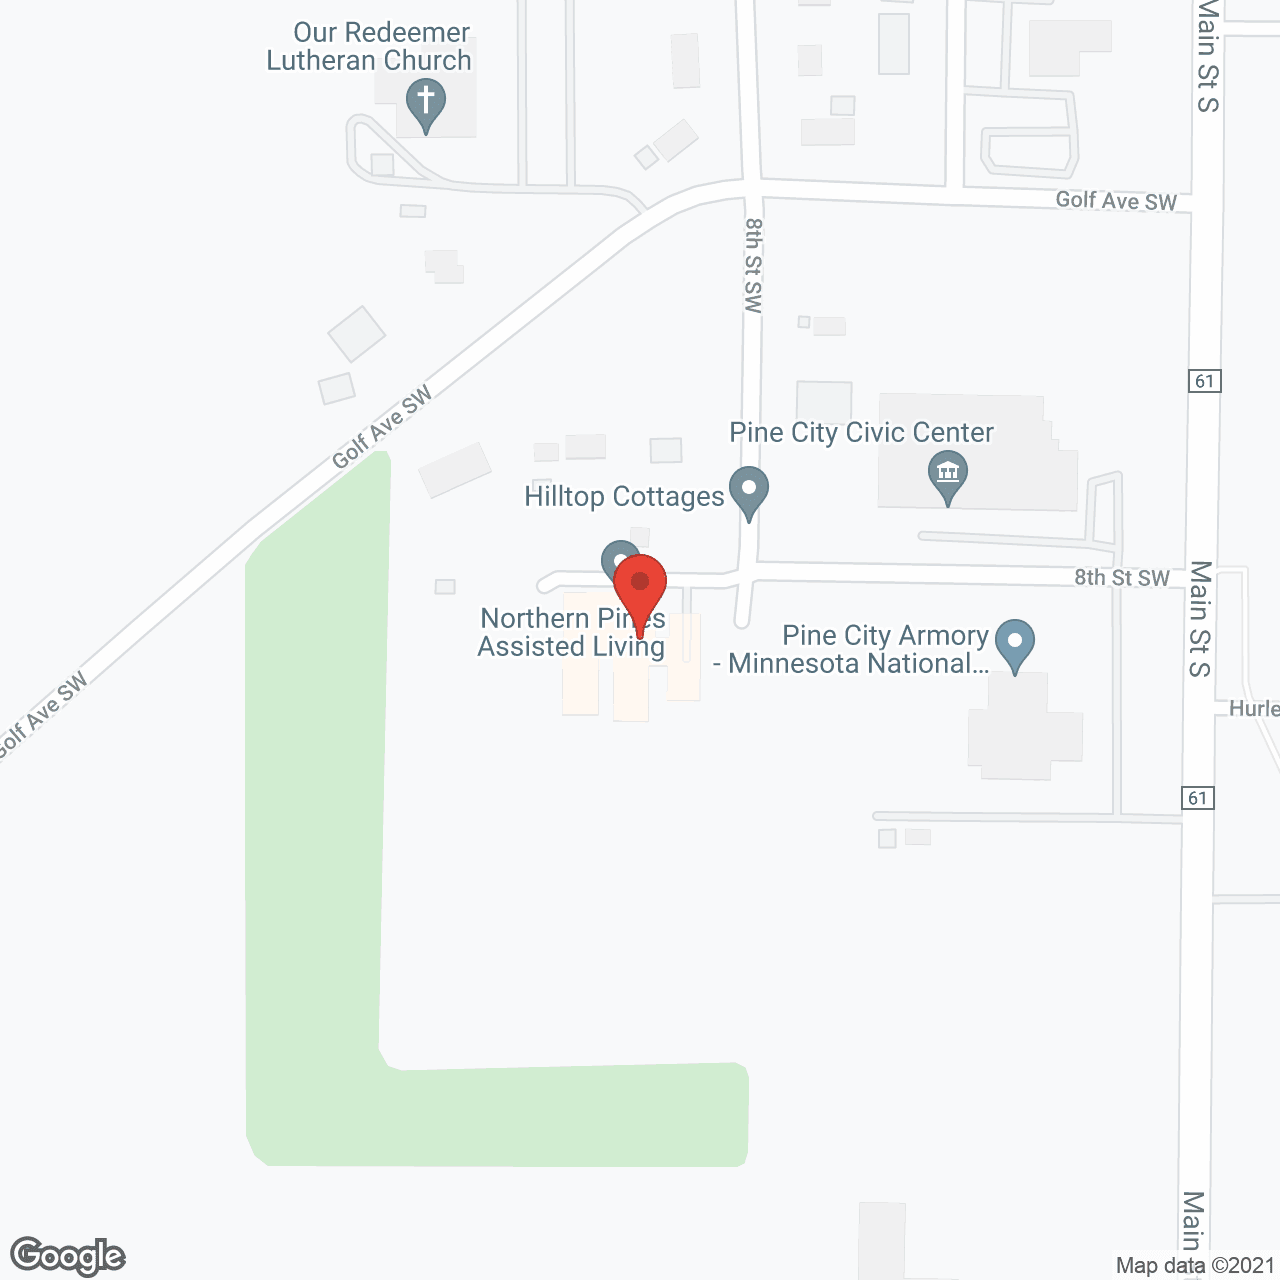 Northern Pines Assisted Living in google map